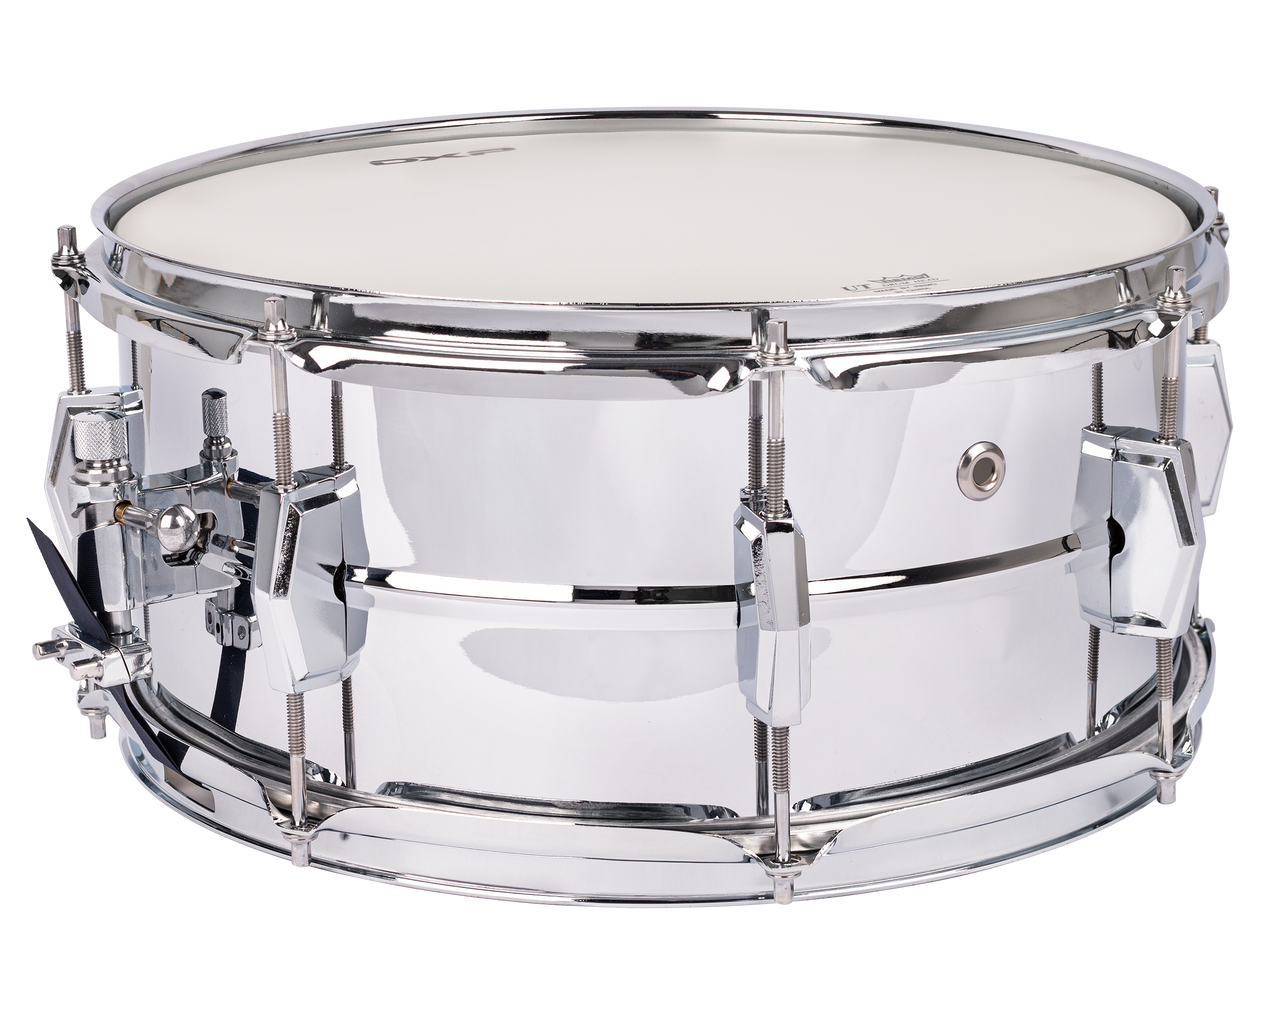 14"x 6_" beaded steel shell. 8 classic look, bridge style chrome lugs. Super smooth strainer. Remo Coated UT Drum head.